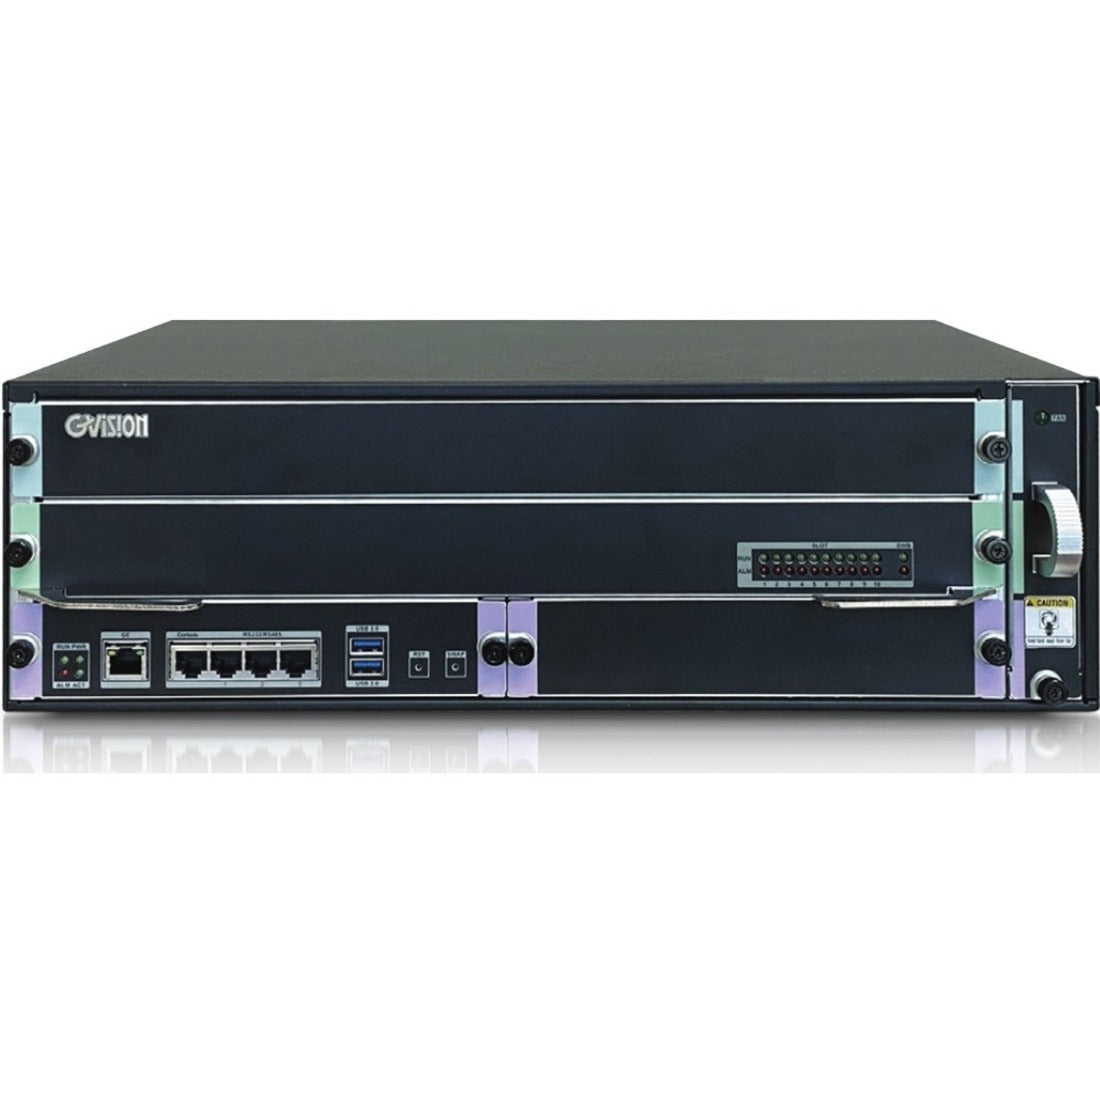 GVision 8 Input and 8 Output Video Wall Controller